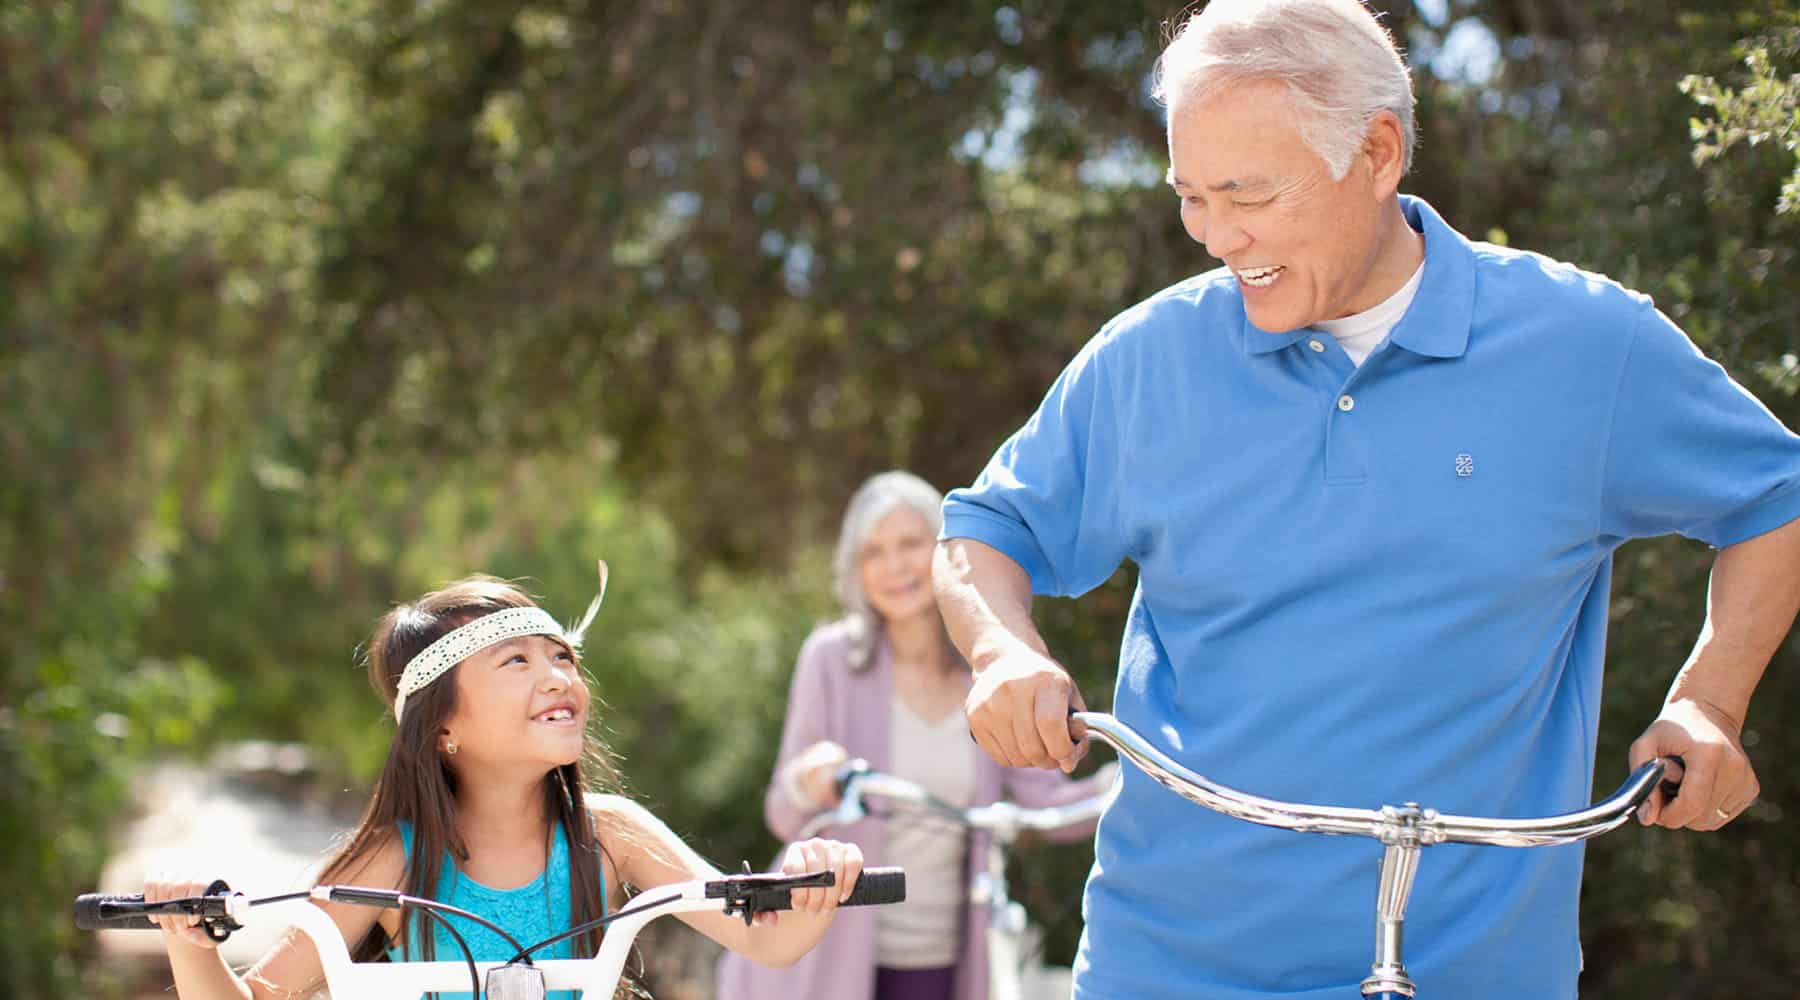 Grandparents riding bikes with their granddaughter